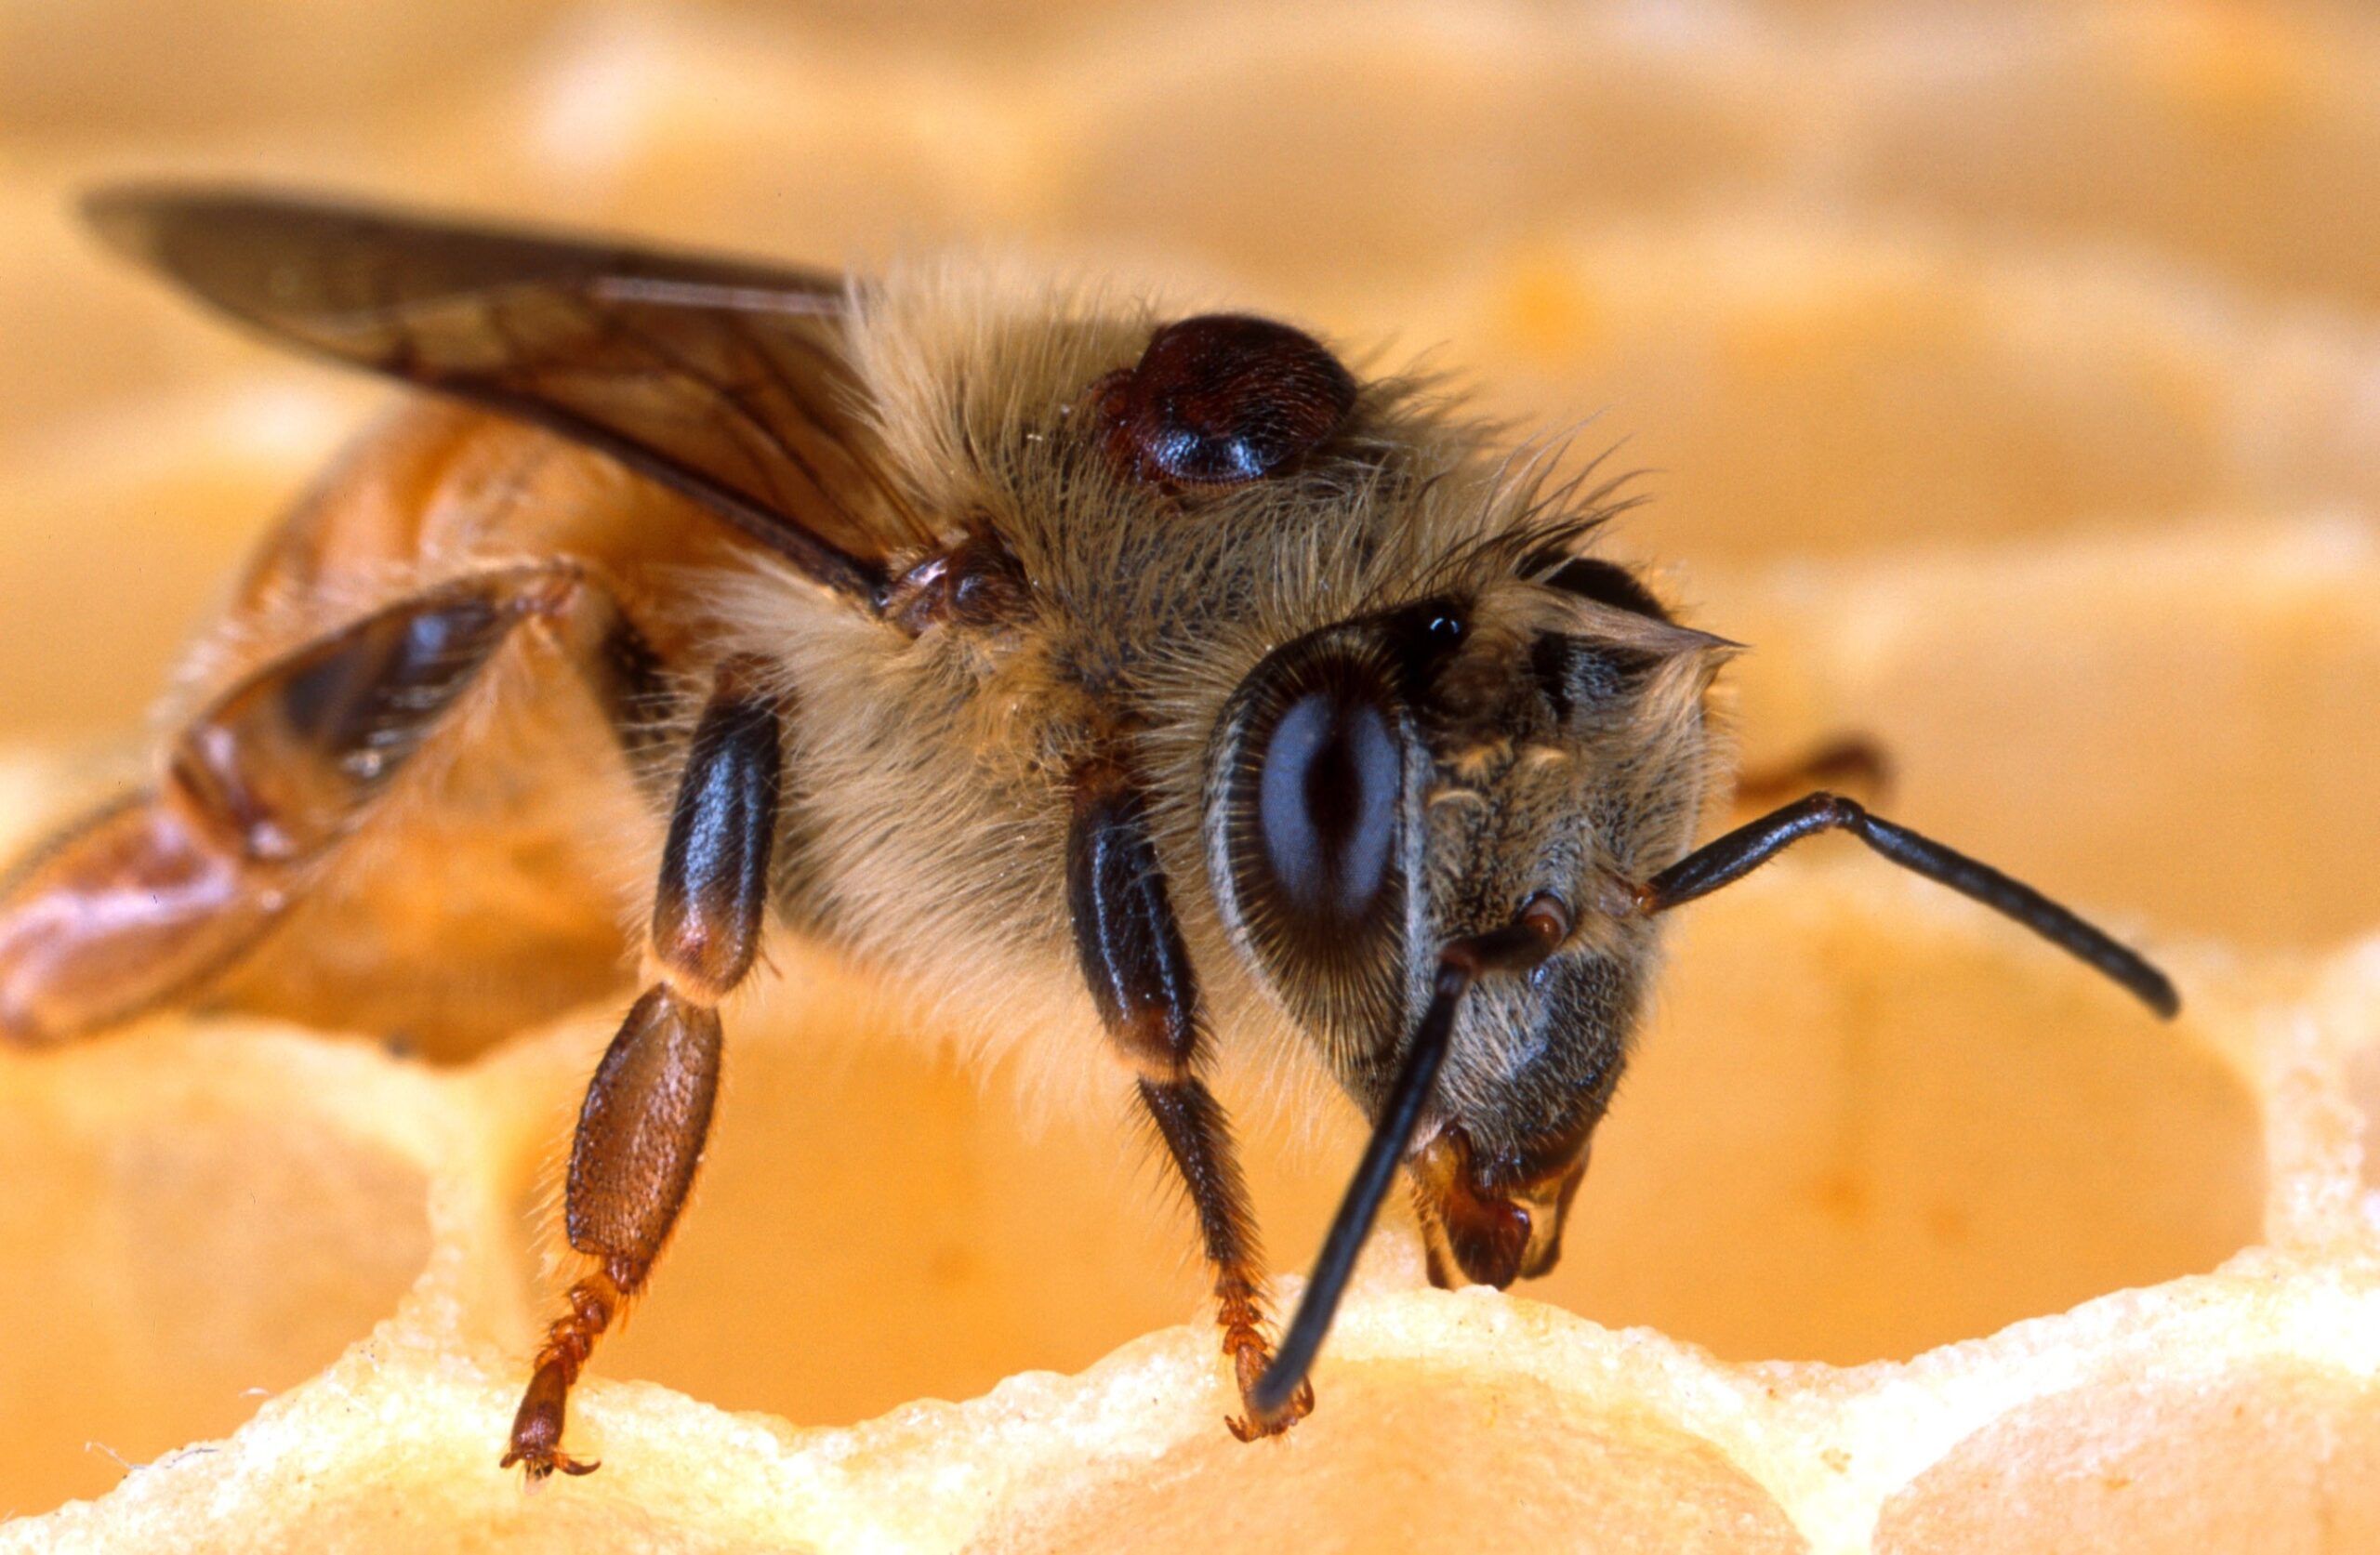 A bee with a varroa mite on it